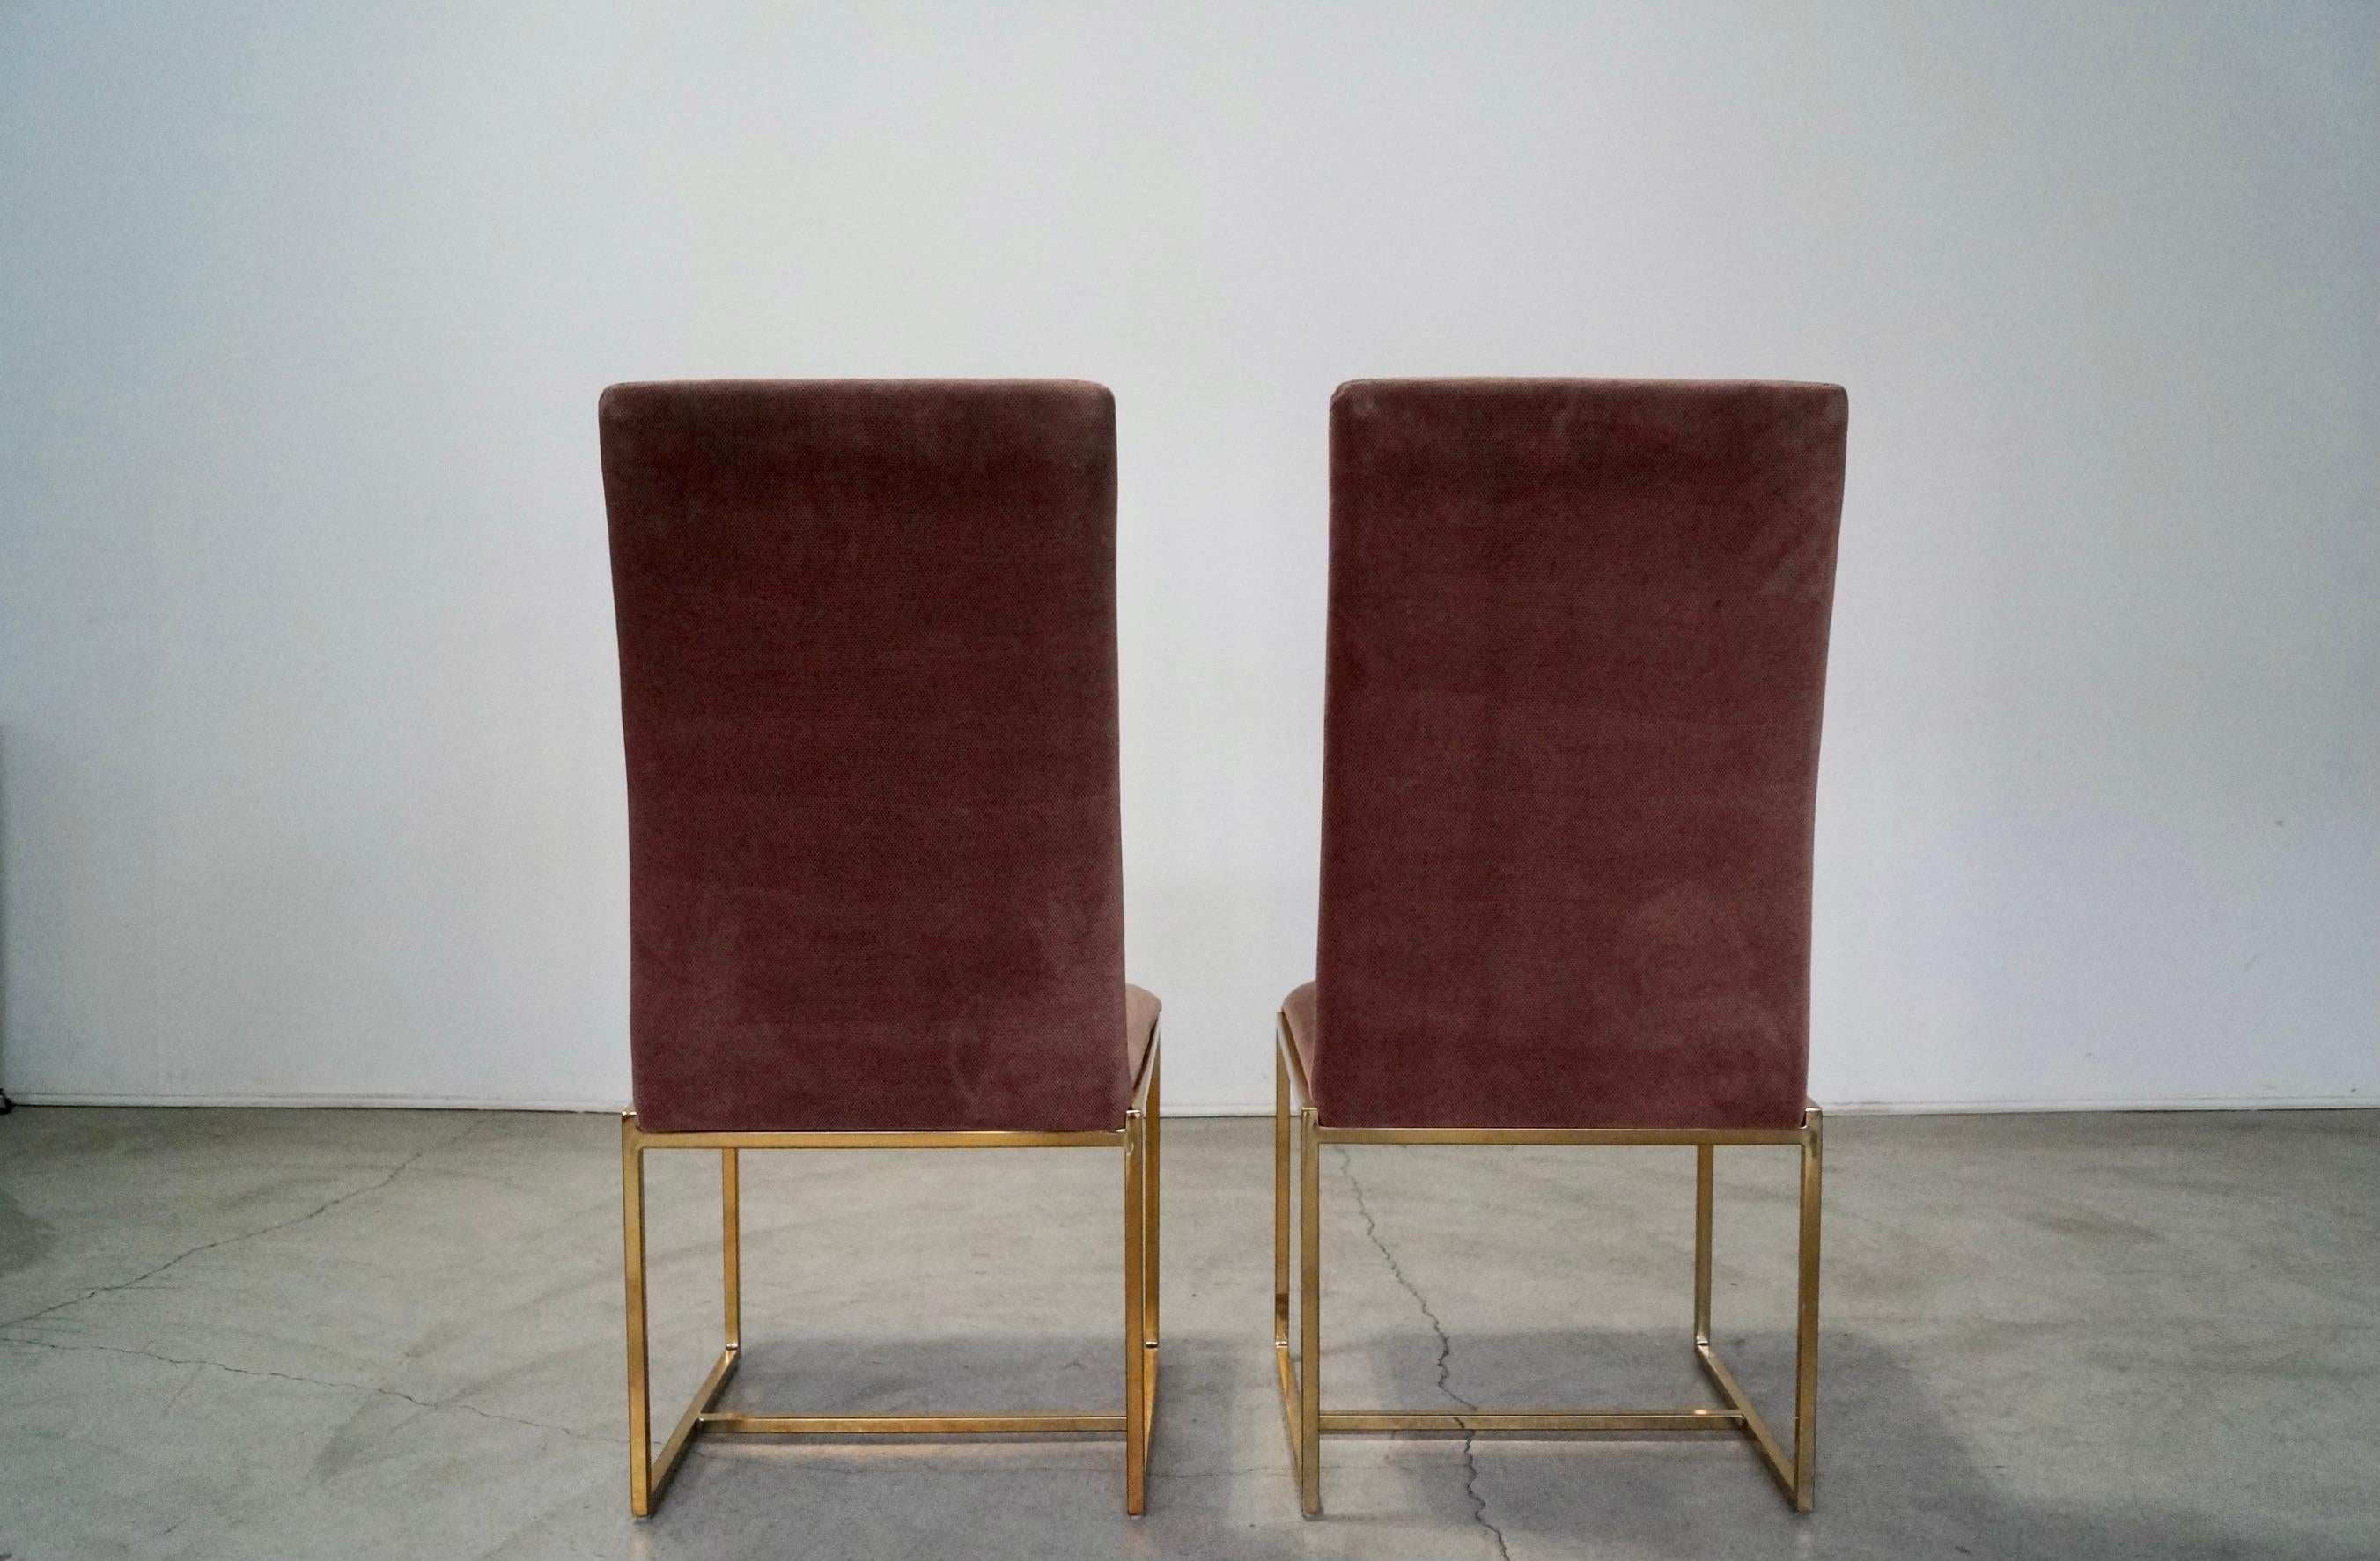 1970's Mid-Century Modern Milo Baughman Style Brass Dining Chairs - a Pair For Sale 1